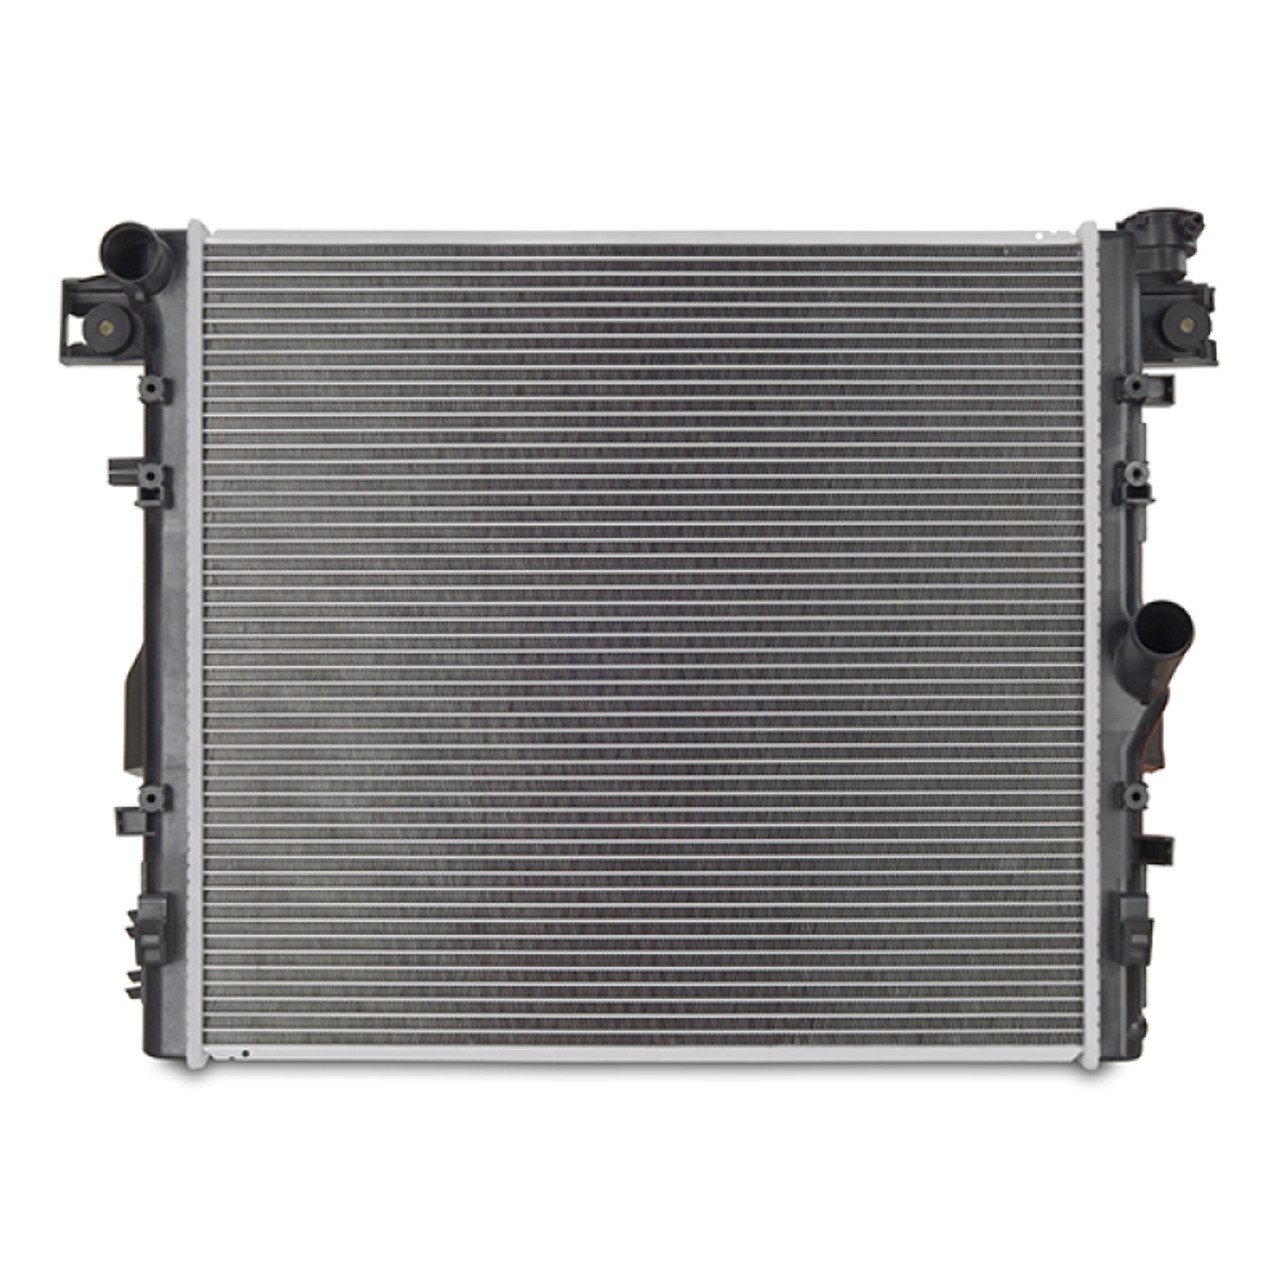 Mishimoto 07-15 Jeep Wrangler JK Replacement Radiator - Plastic - R2957-MT Photo - out of package